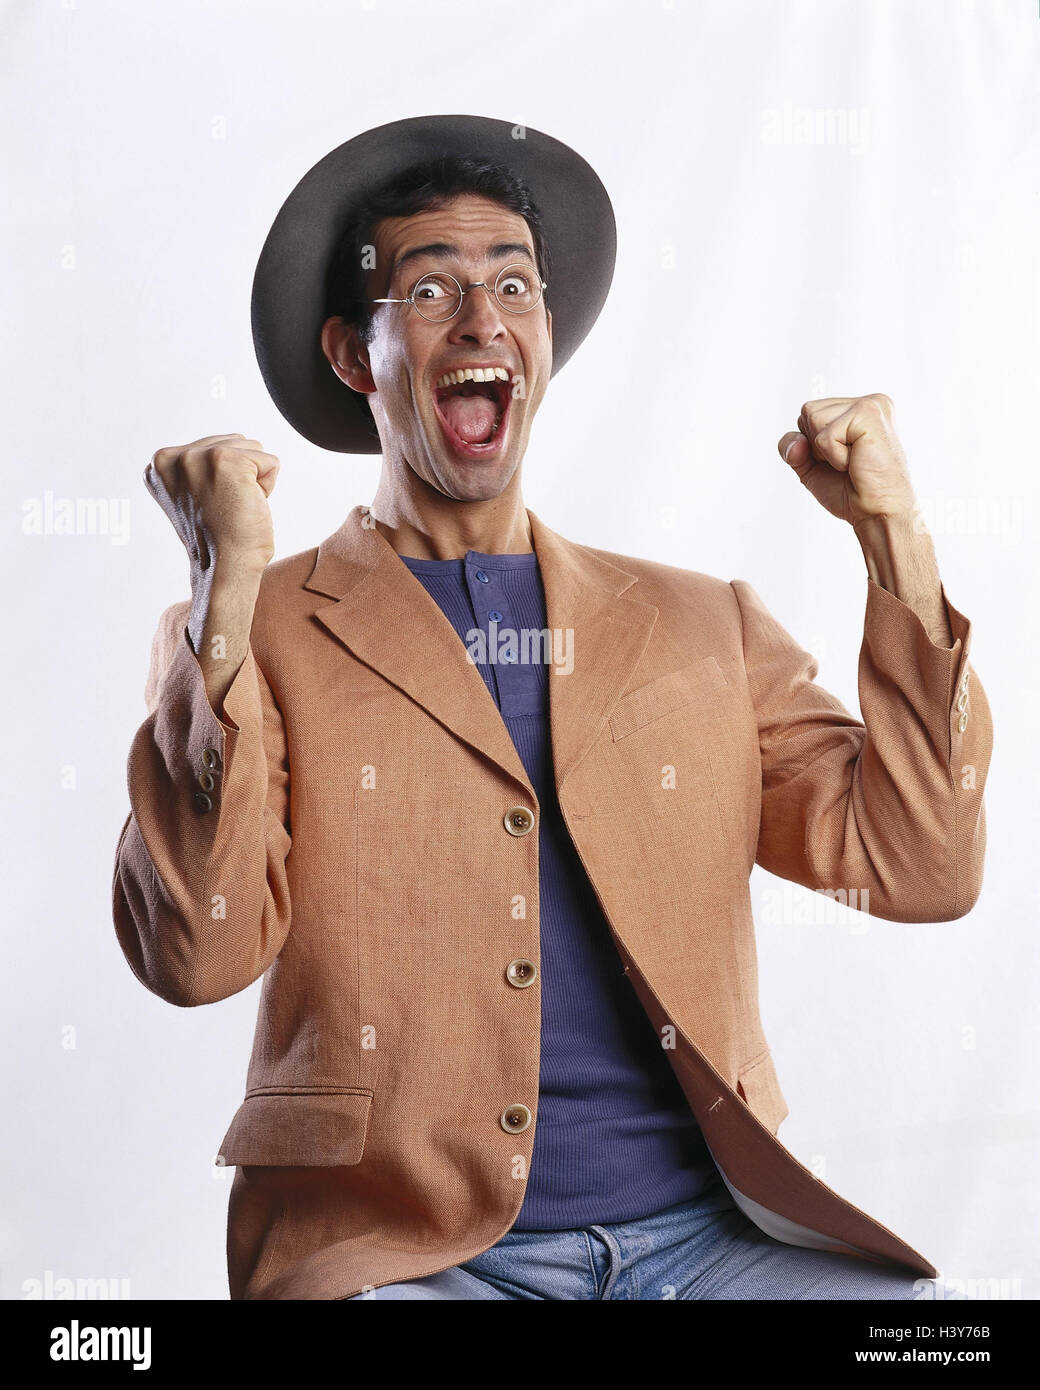 Man, care, glasses, concentrated fists, gesture, joy, enthusiasm, near mb 106 A6 Stock Photo